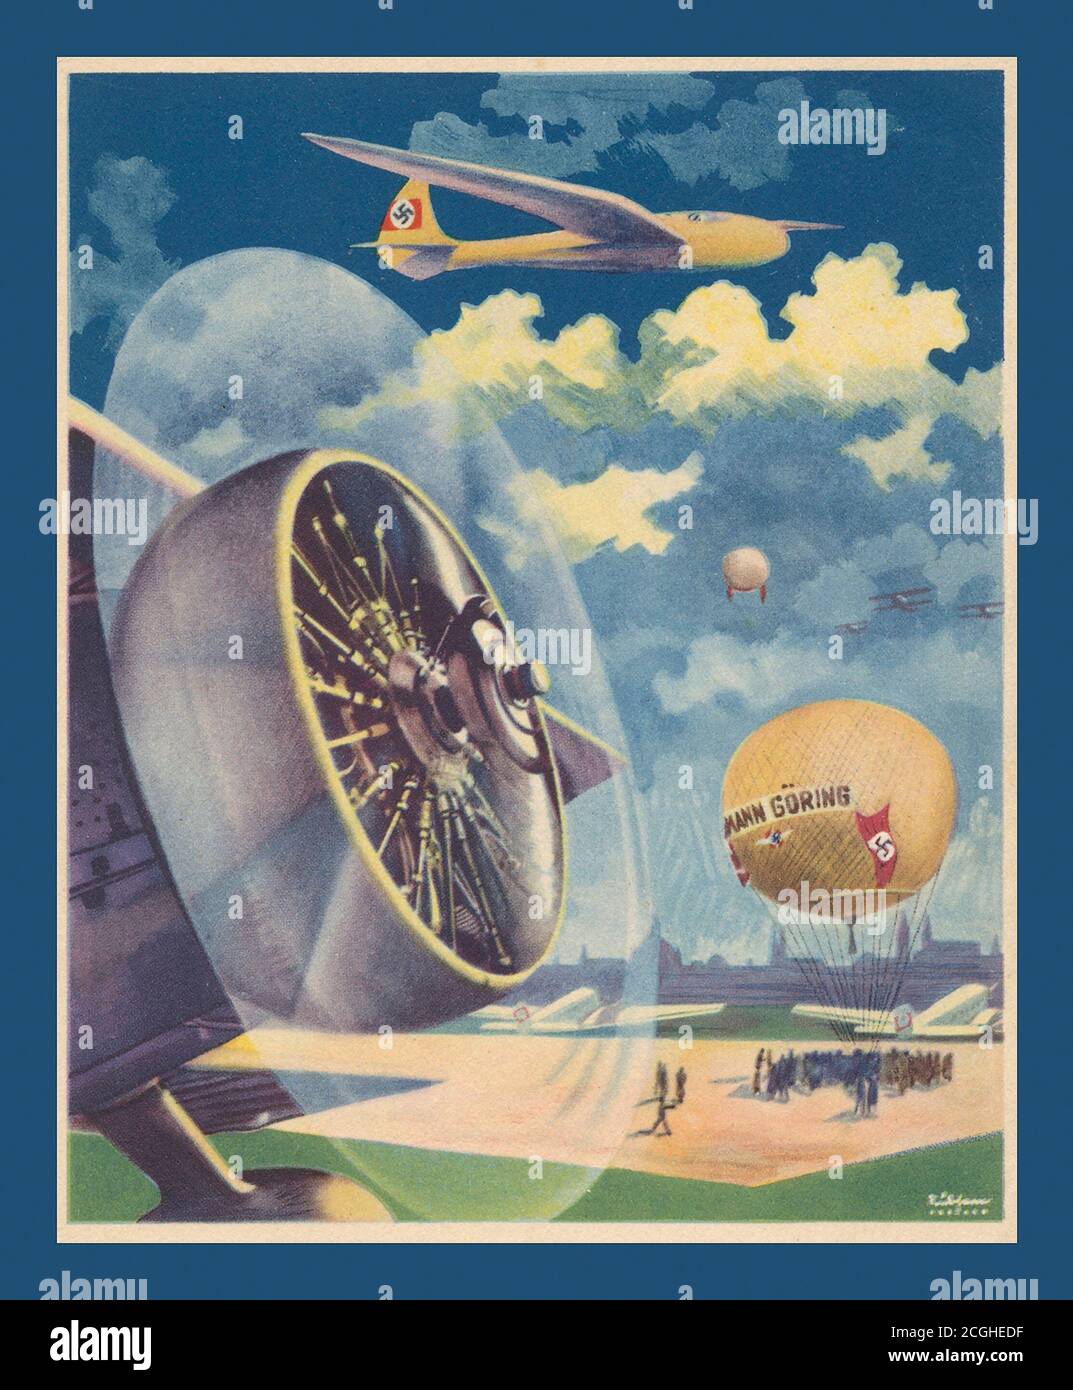 Vintage 1930’s NAZI FLYING CORPS AVIATION Nazi Germany Propaganda: 1937  card 'National Socialist  Fliegerkorps (NSFK)', with illustration of balloon with Hermann Göring label and swastika flag, glider and propeller, Reichswerke Hermann Göring was an industrial conglomerate of Nazi Germany. It was established in July 1937. The state-owned Reichswerke was seen as a vehicle of hastening growth in ore mining and steel output for military purposes. Stock Photo